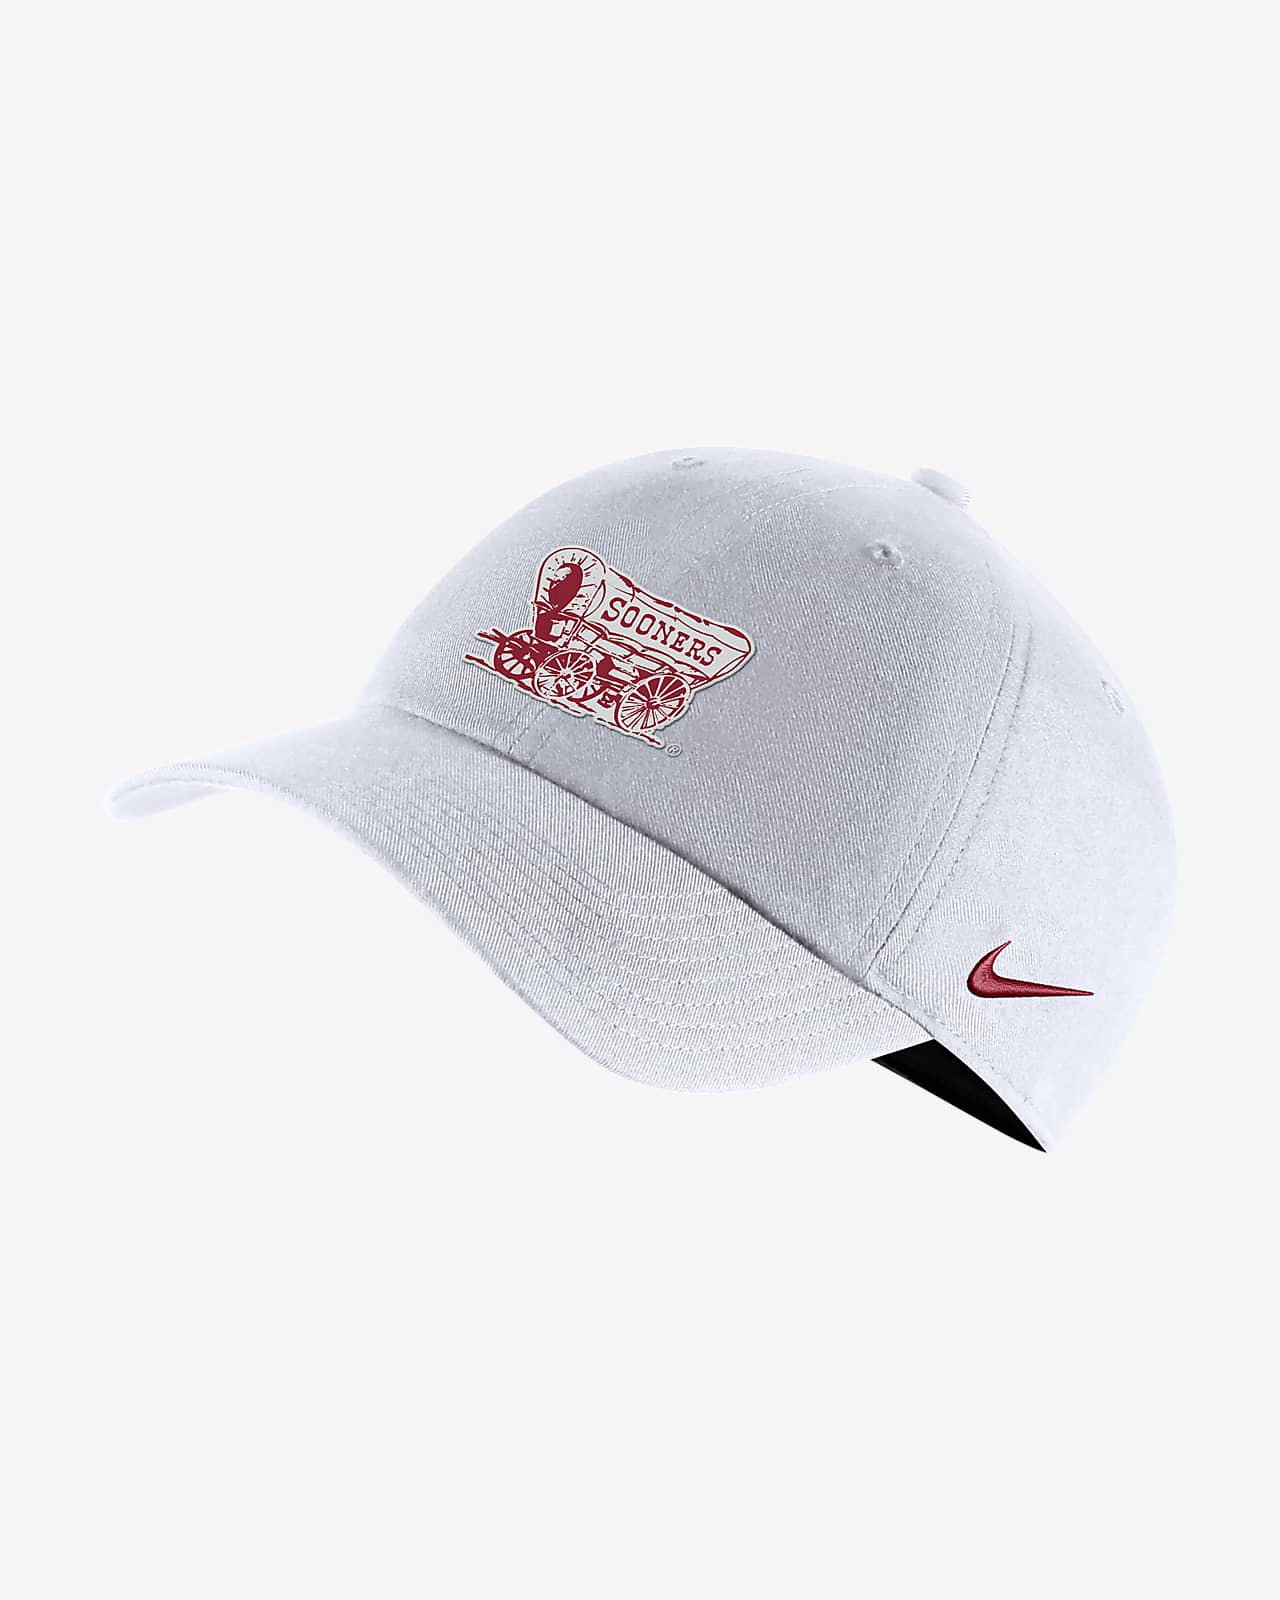 oklahoma-adjustable-hat-4hFzl8.png